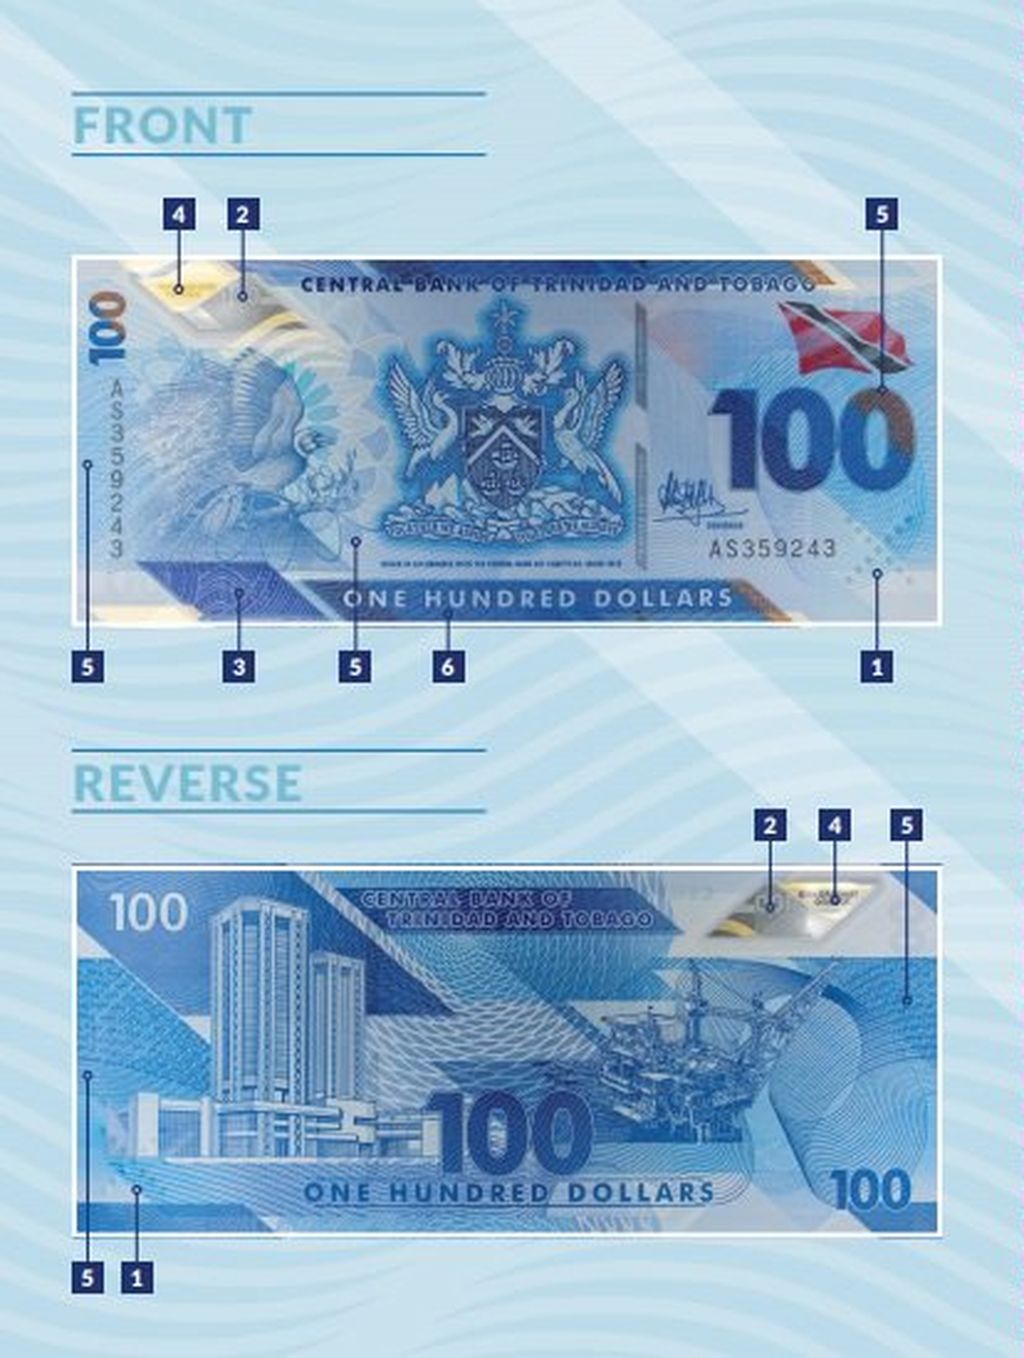 Know what to look for on the real polymer $100 bill